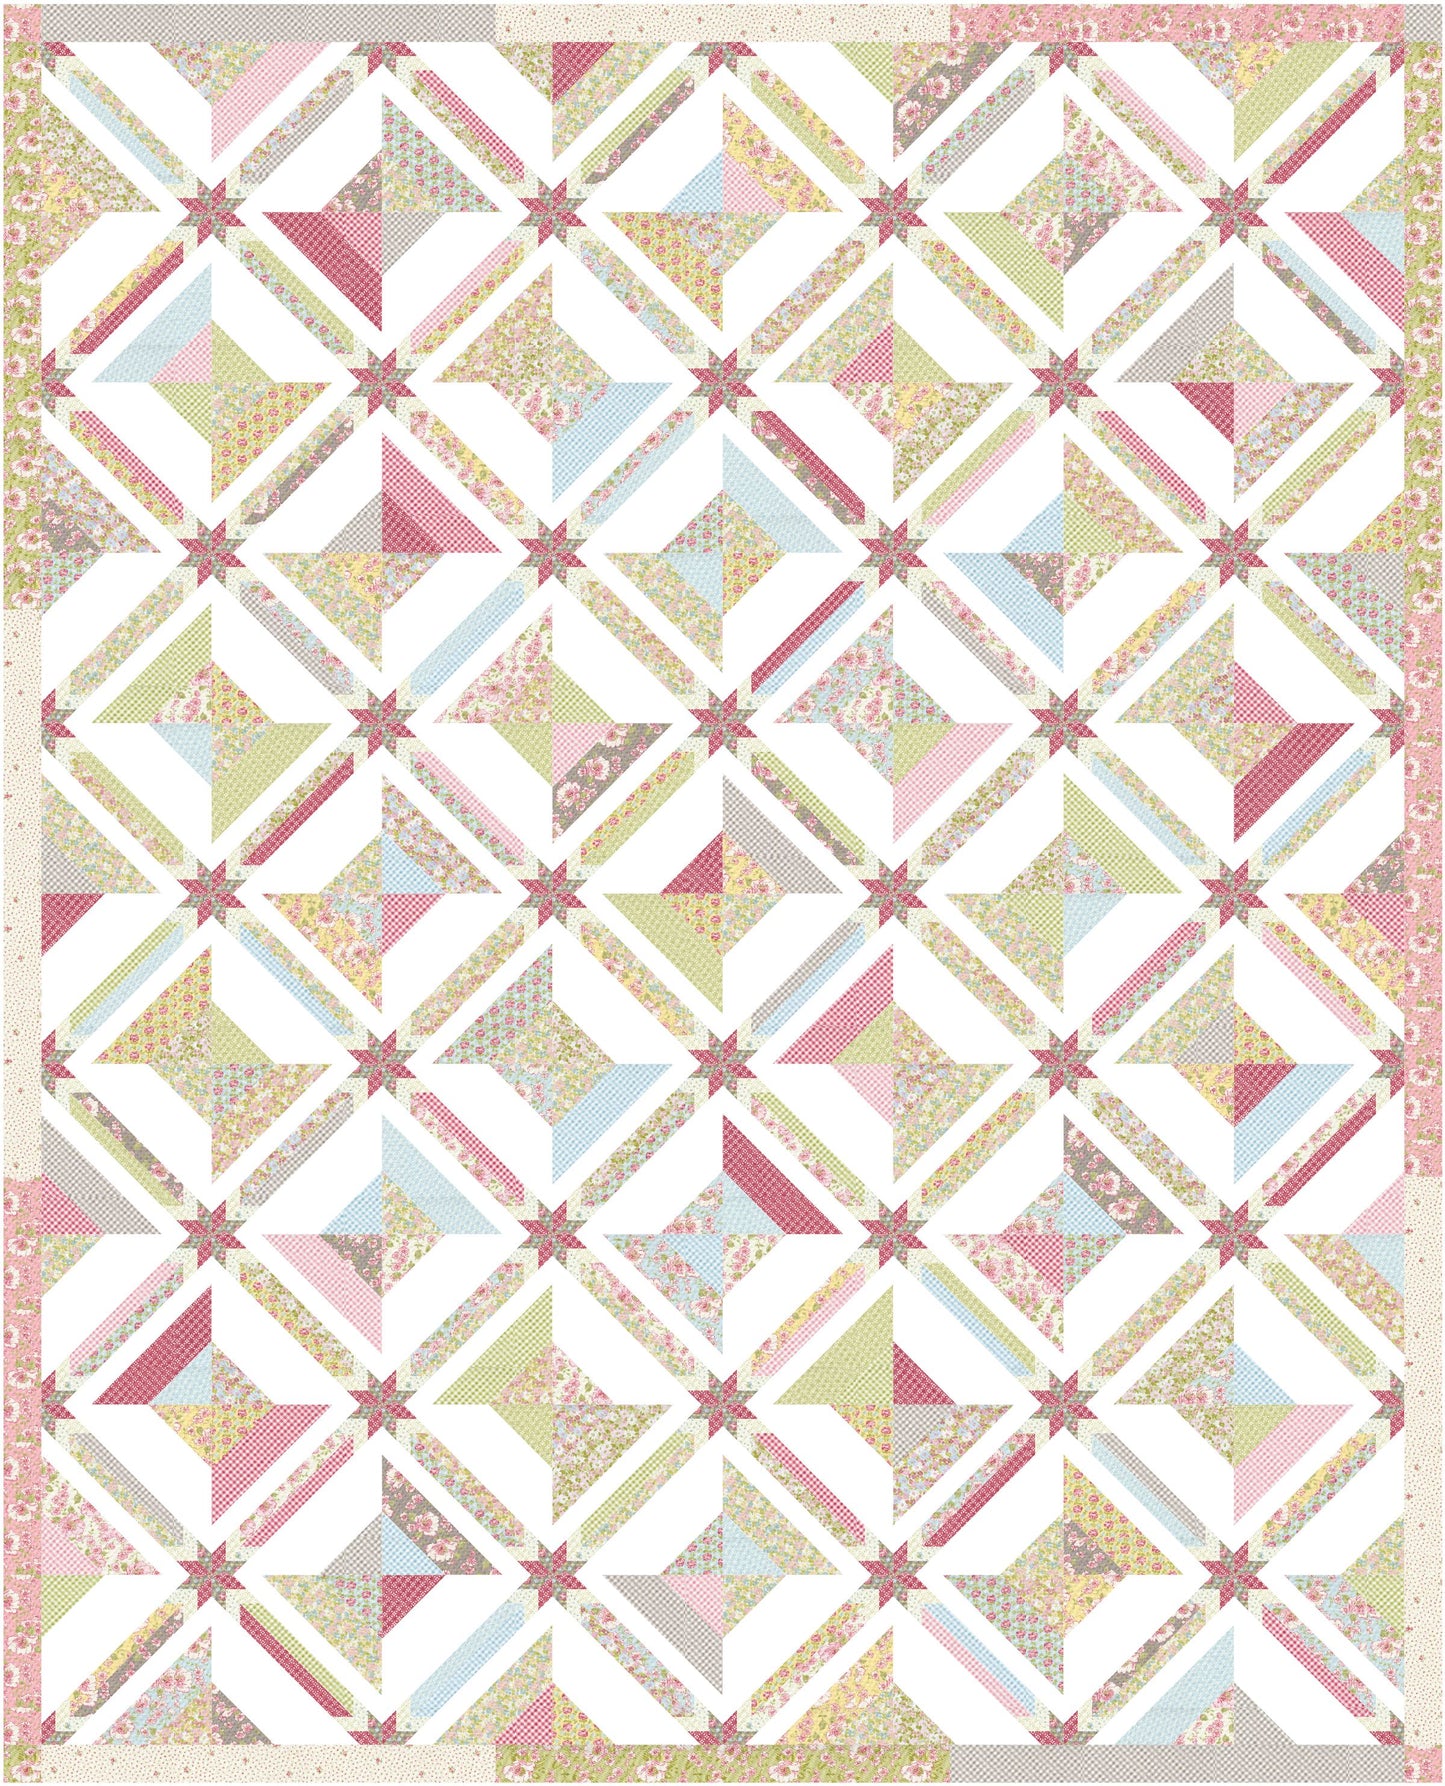 Grace Spools and Stars Quilt Kit